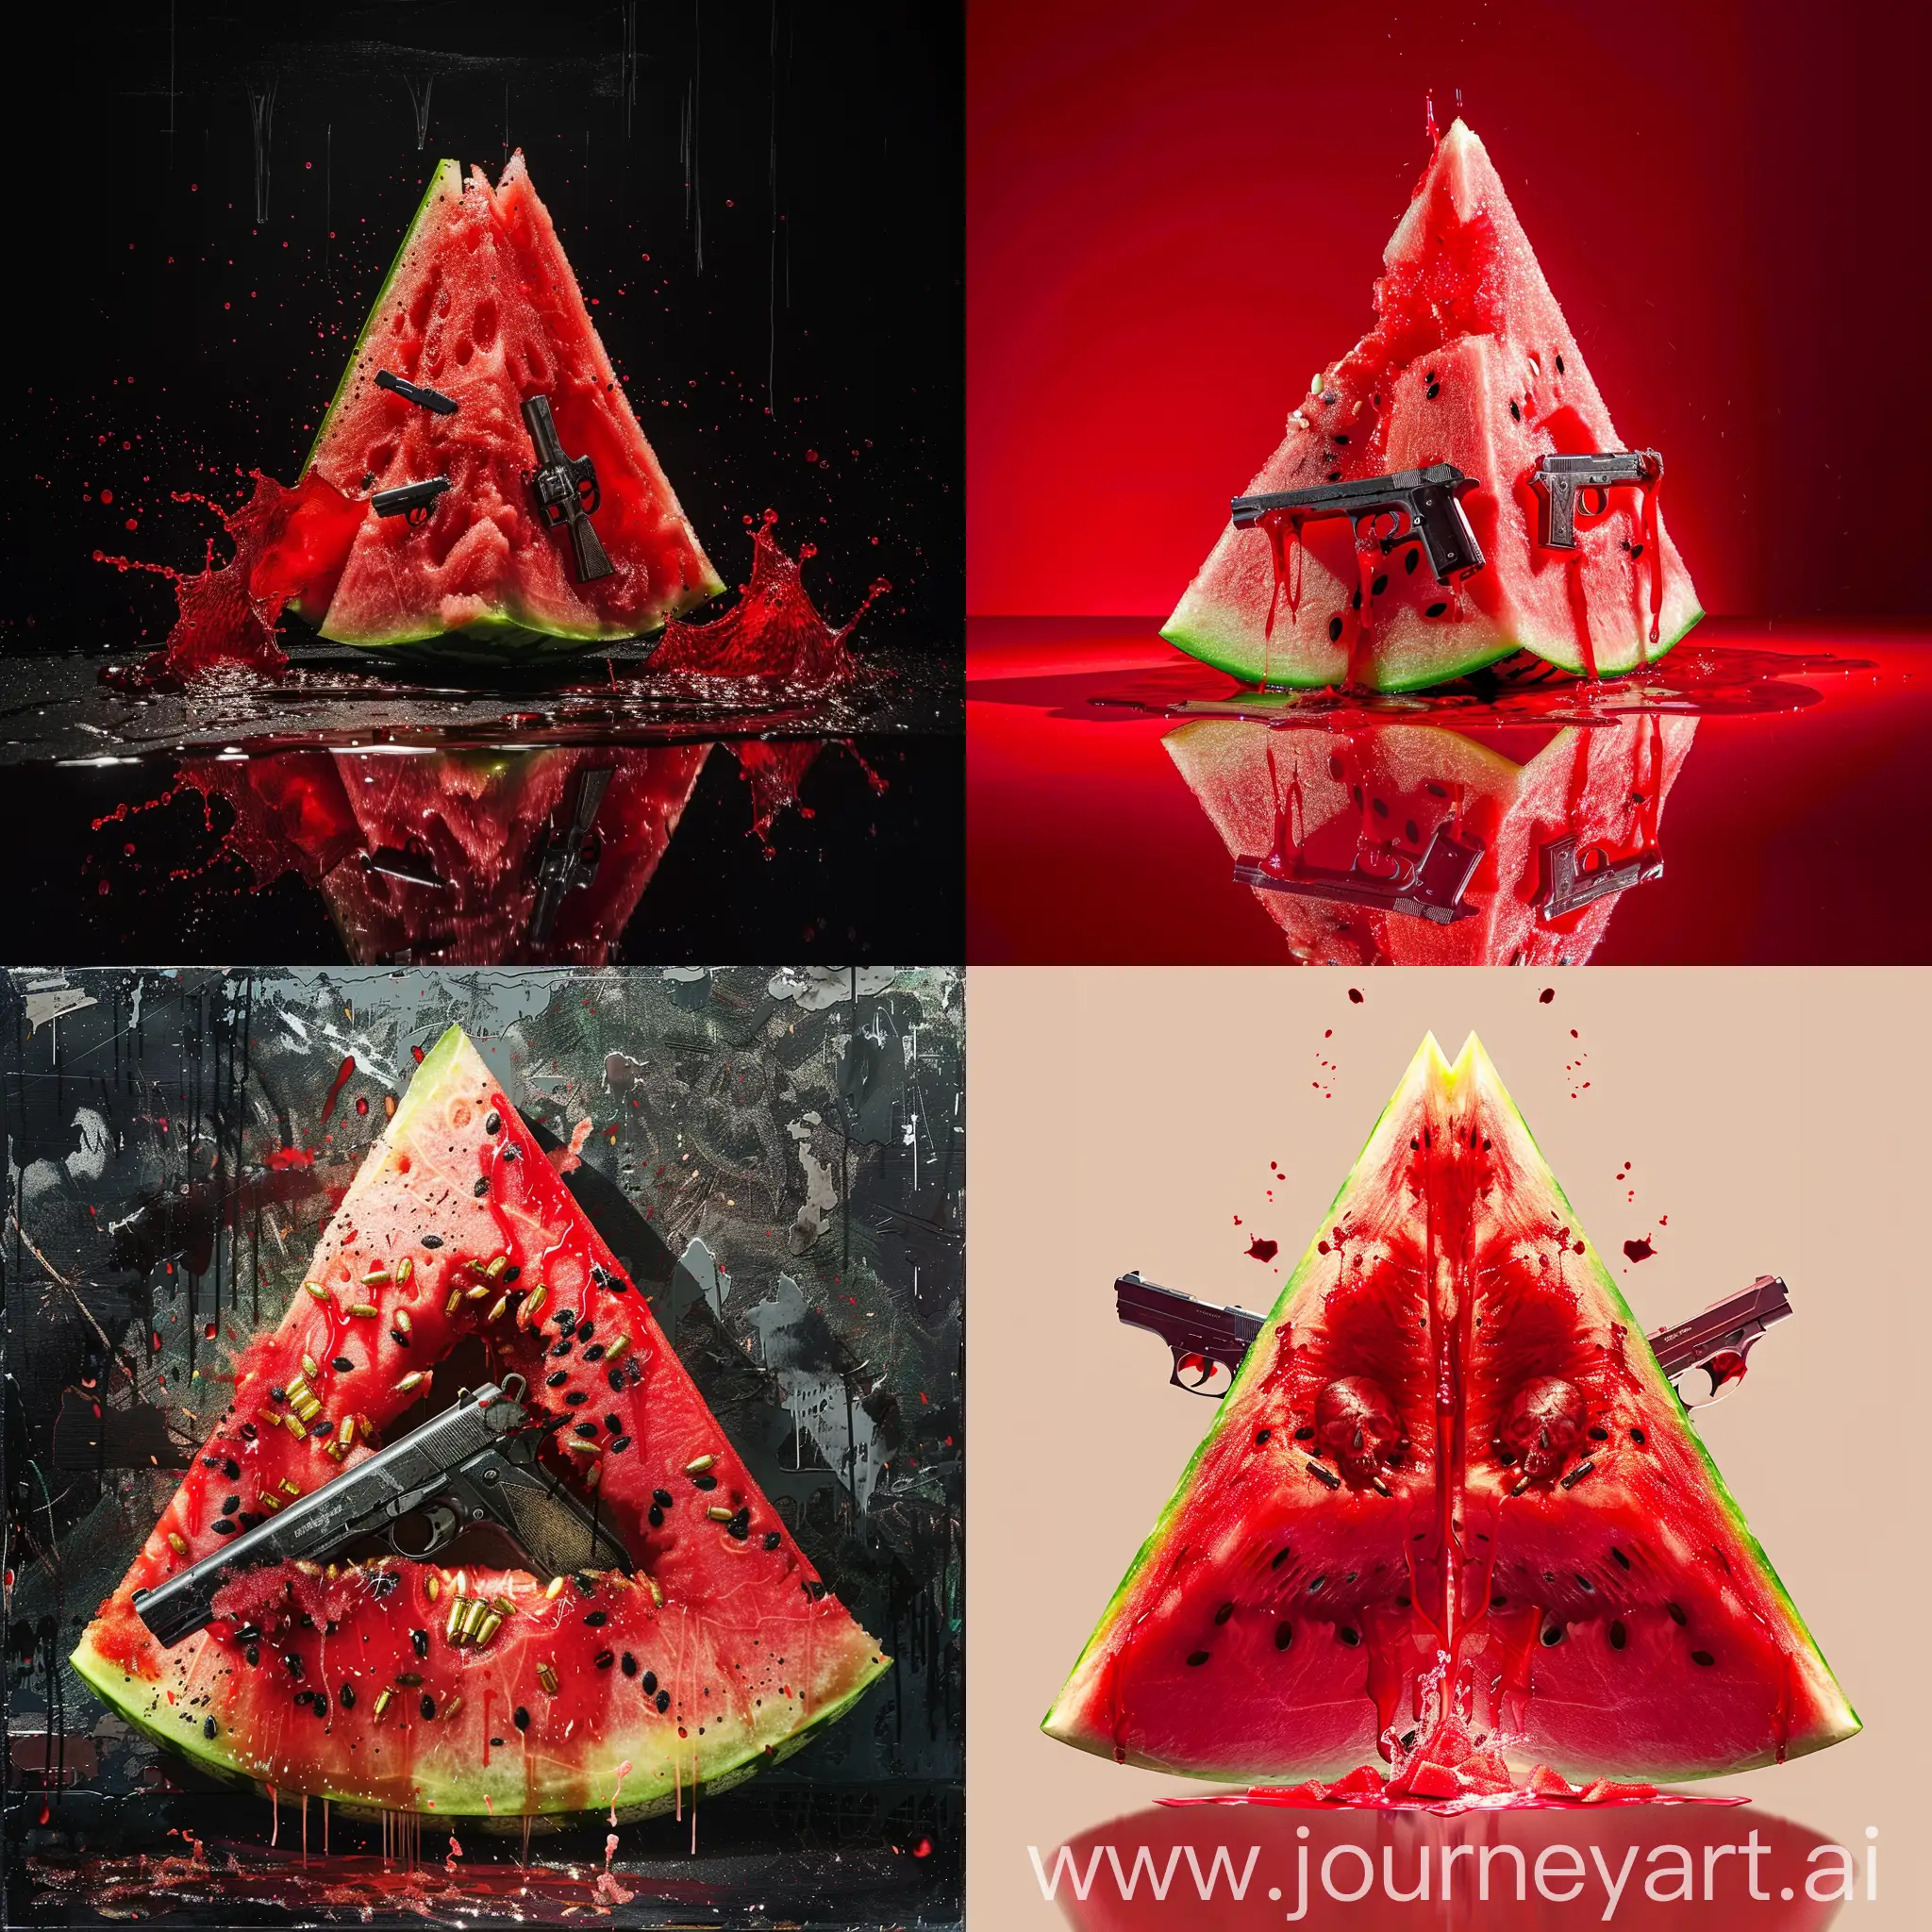 Triangled-Watermelon-with-Blood-and-Guns-Artwork